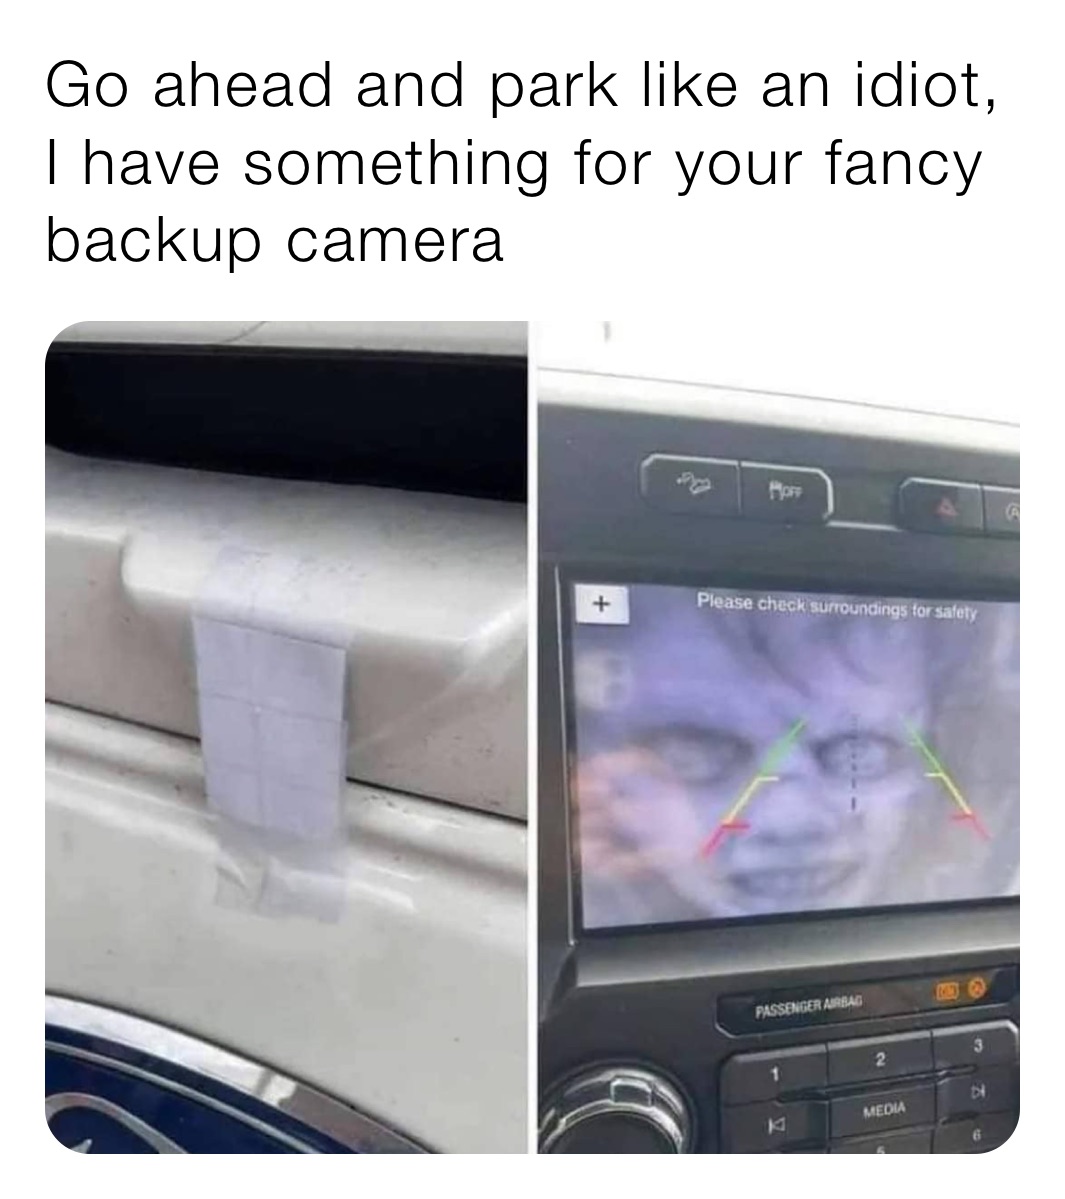 Go ahead and park like an idiot, I have something for your fancy backup camera